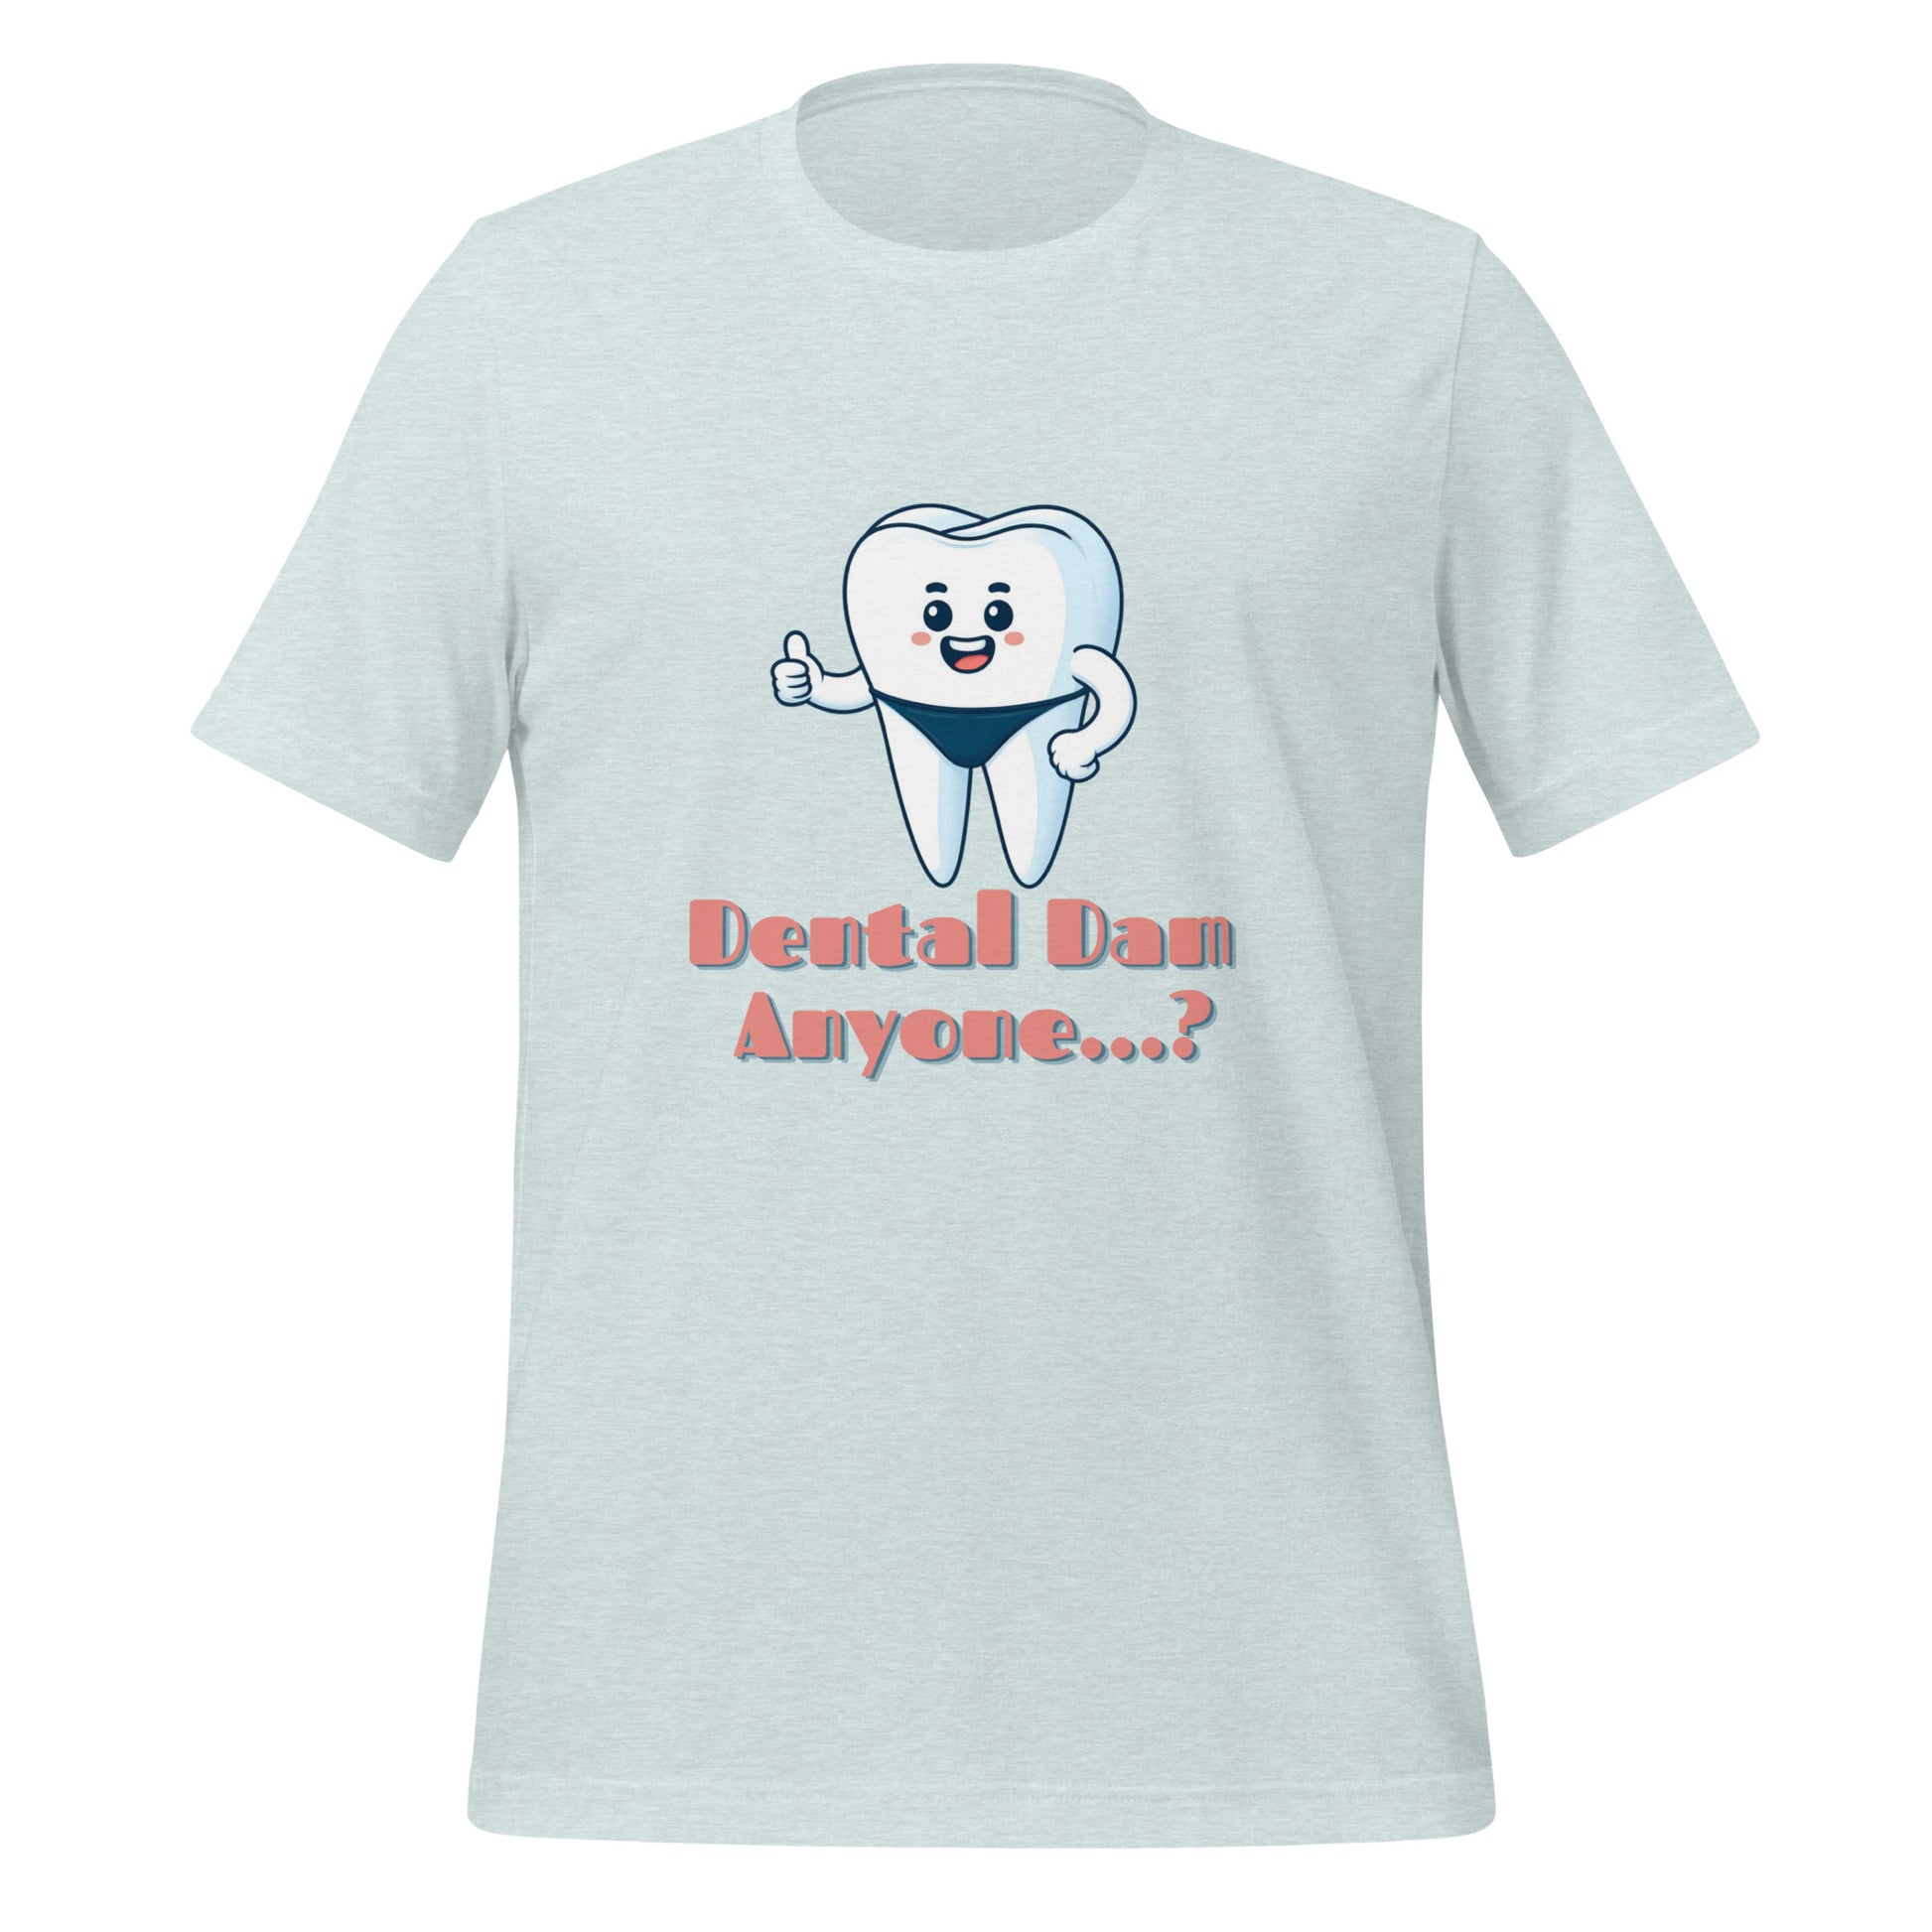 Funny dental shirt featuring a playful tooth character in a speedo with the text ‘Dental Dam Anyone?’, perfect for dentists, dental hygienists, and dental students who enjoy dental humor. This dental shirt is a unique addition to any dental professional’s wardrobe, making it an ideal dental office shirt. Don’t miss out on our dental assistant shirts and dental hygiene shirts. Heather prism ice blue color.